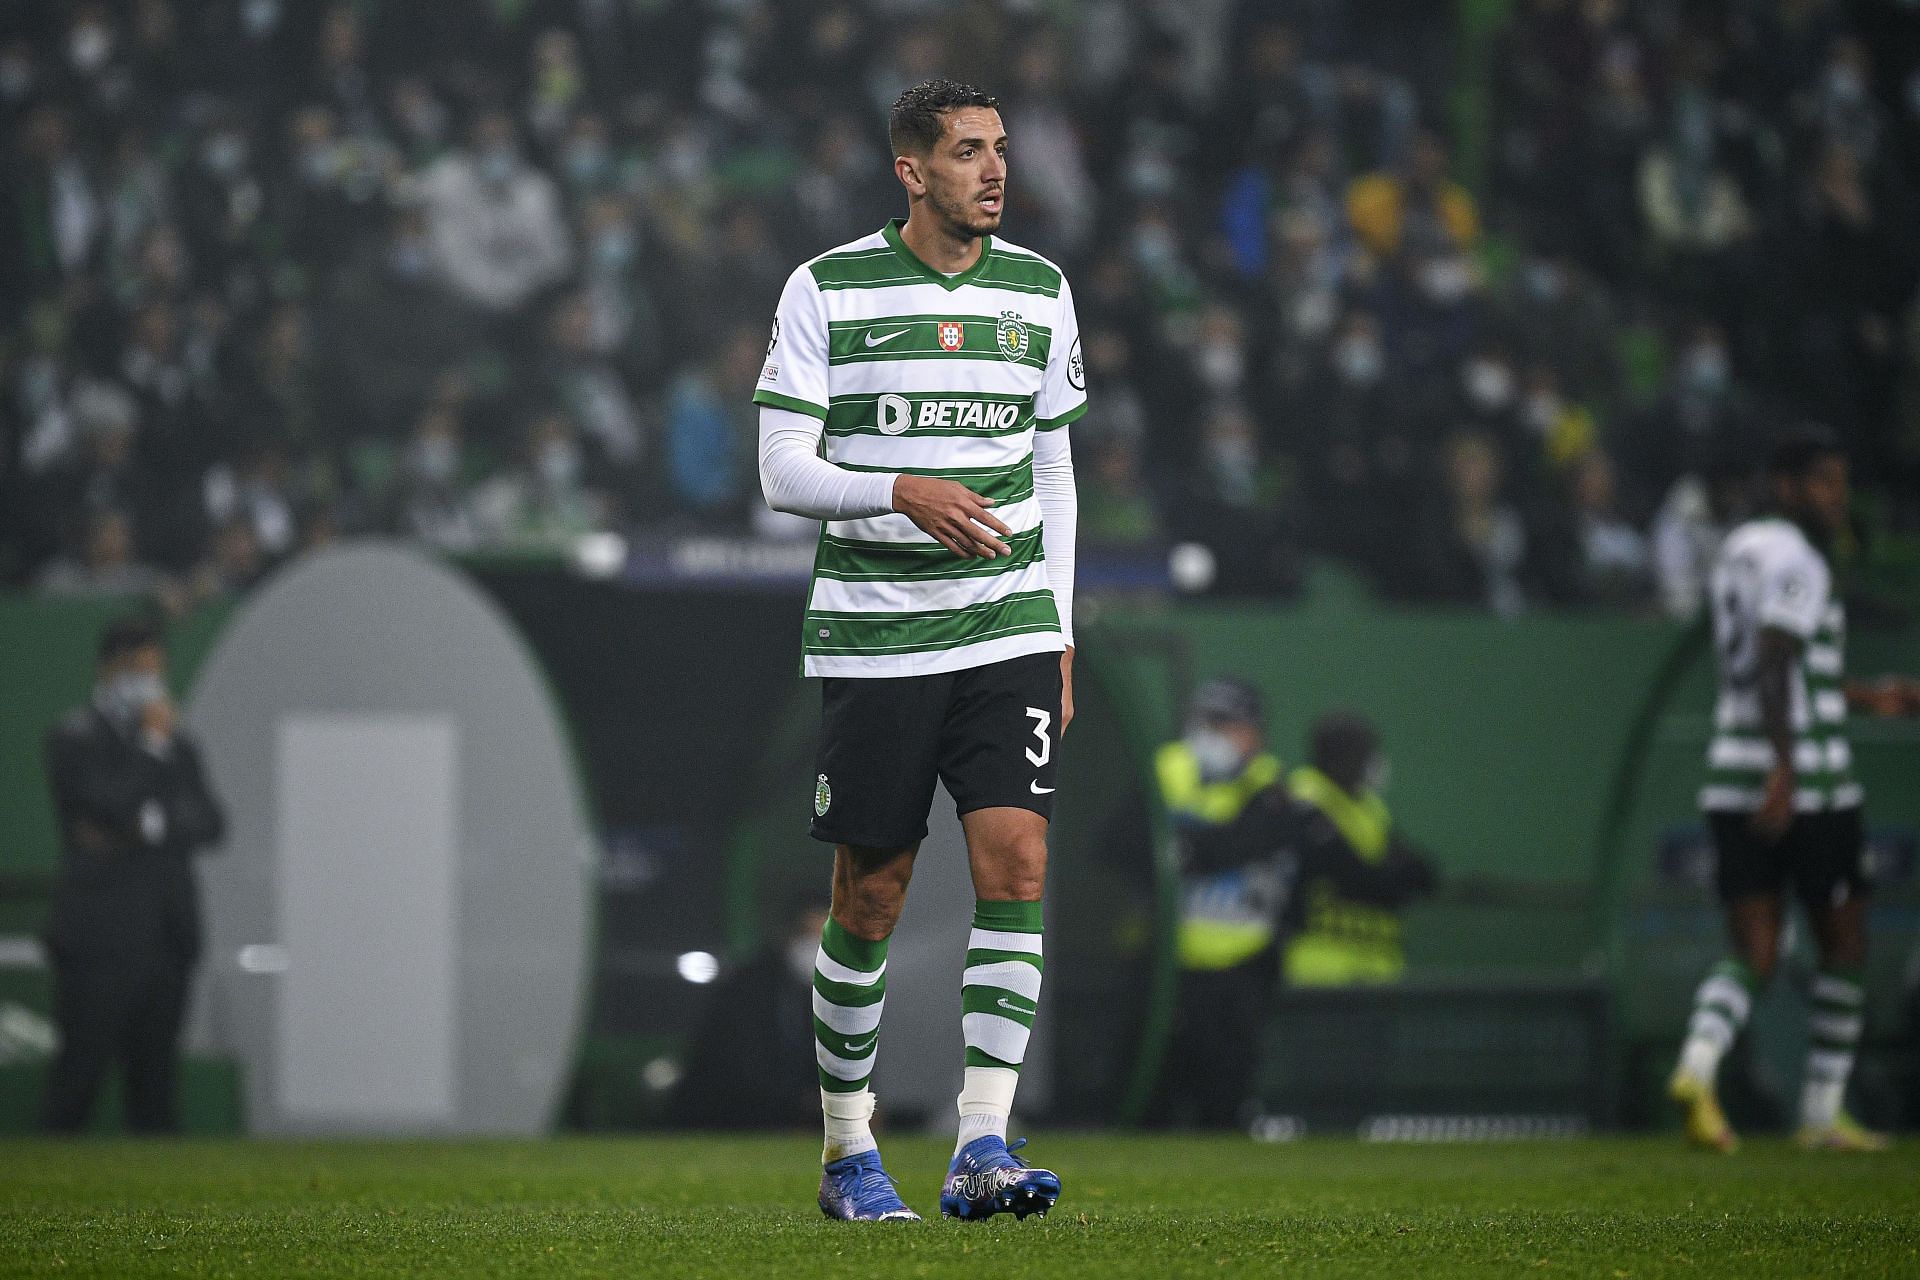 Sporting take on Famalicao in their upcoming Primeira Liga fixture on Sunday